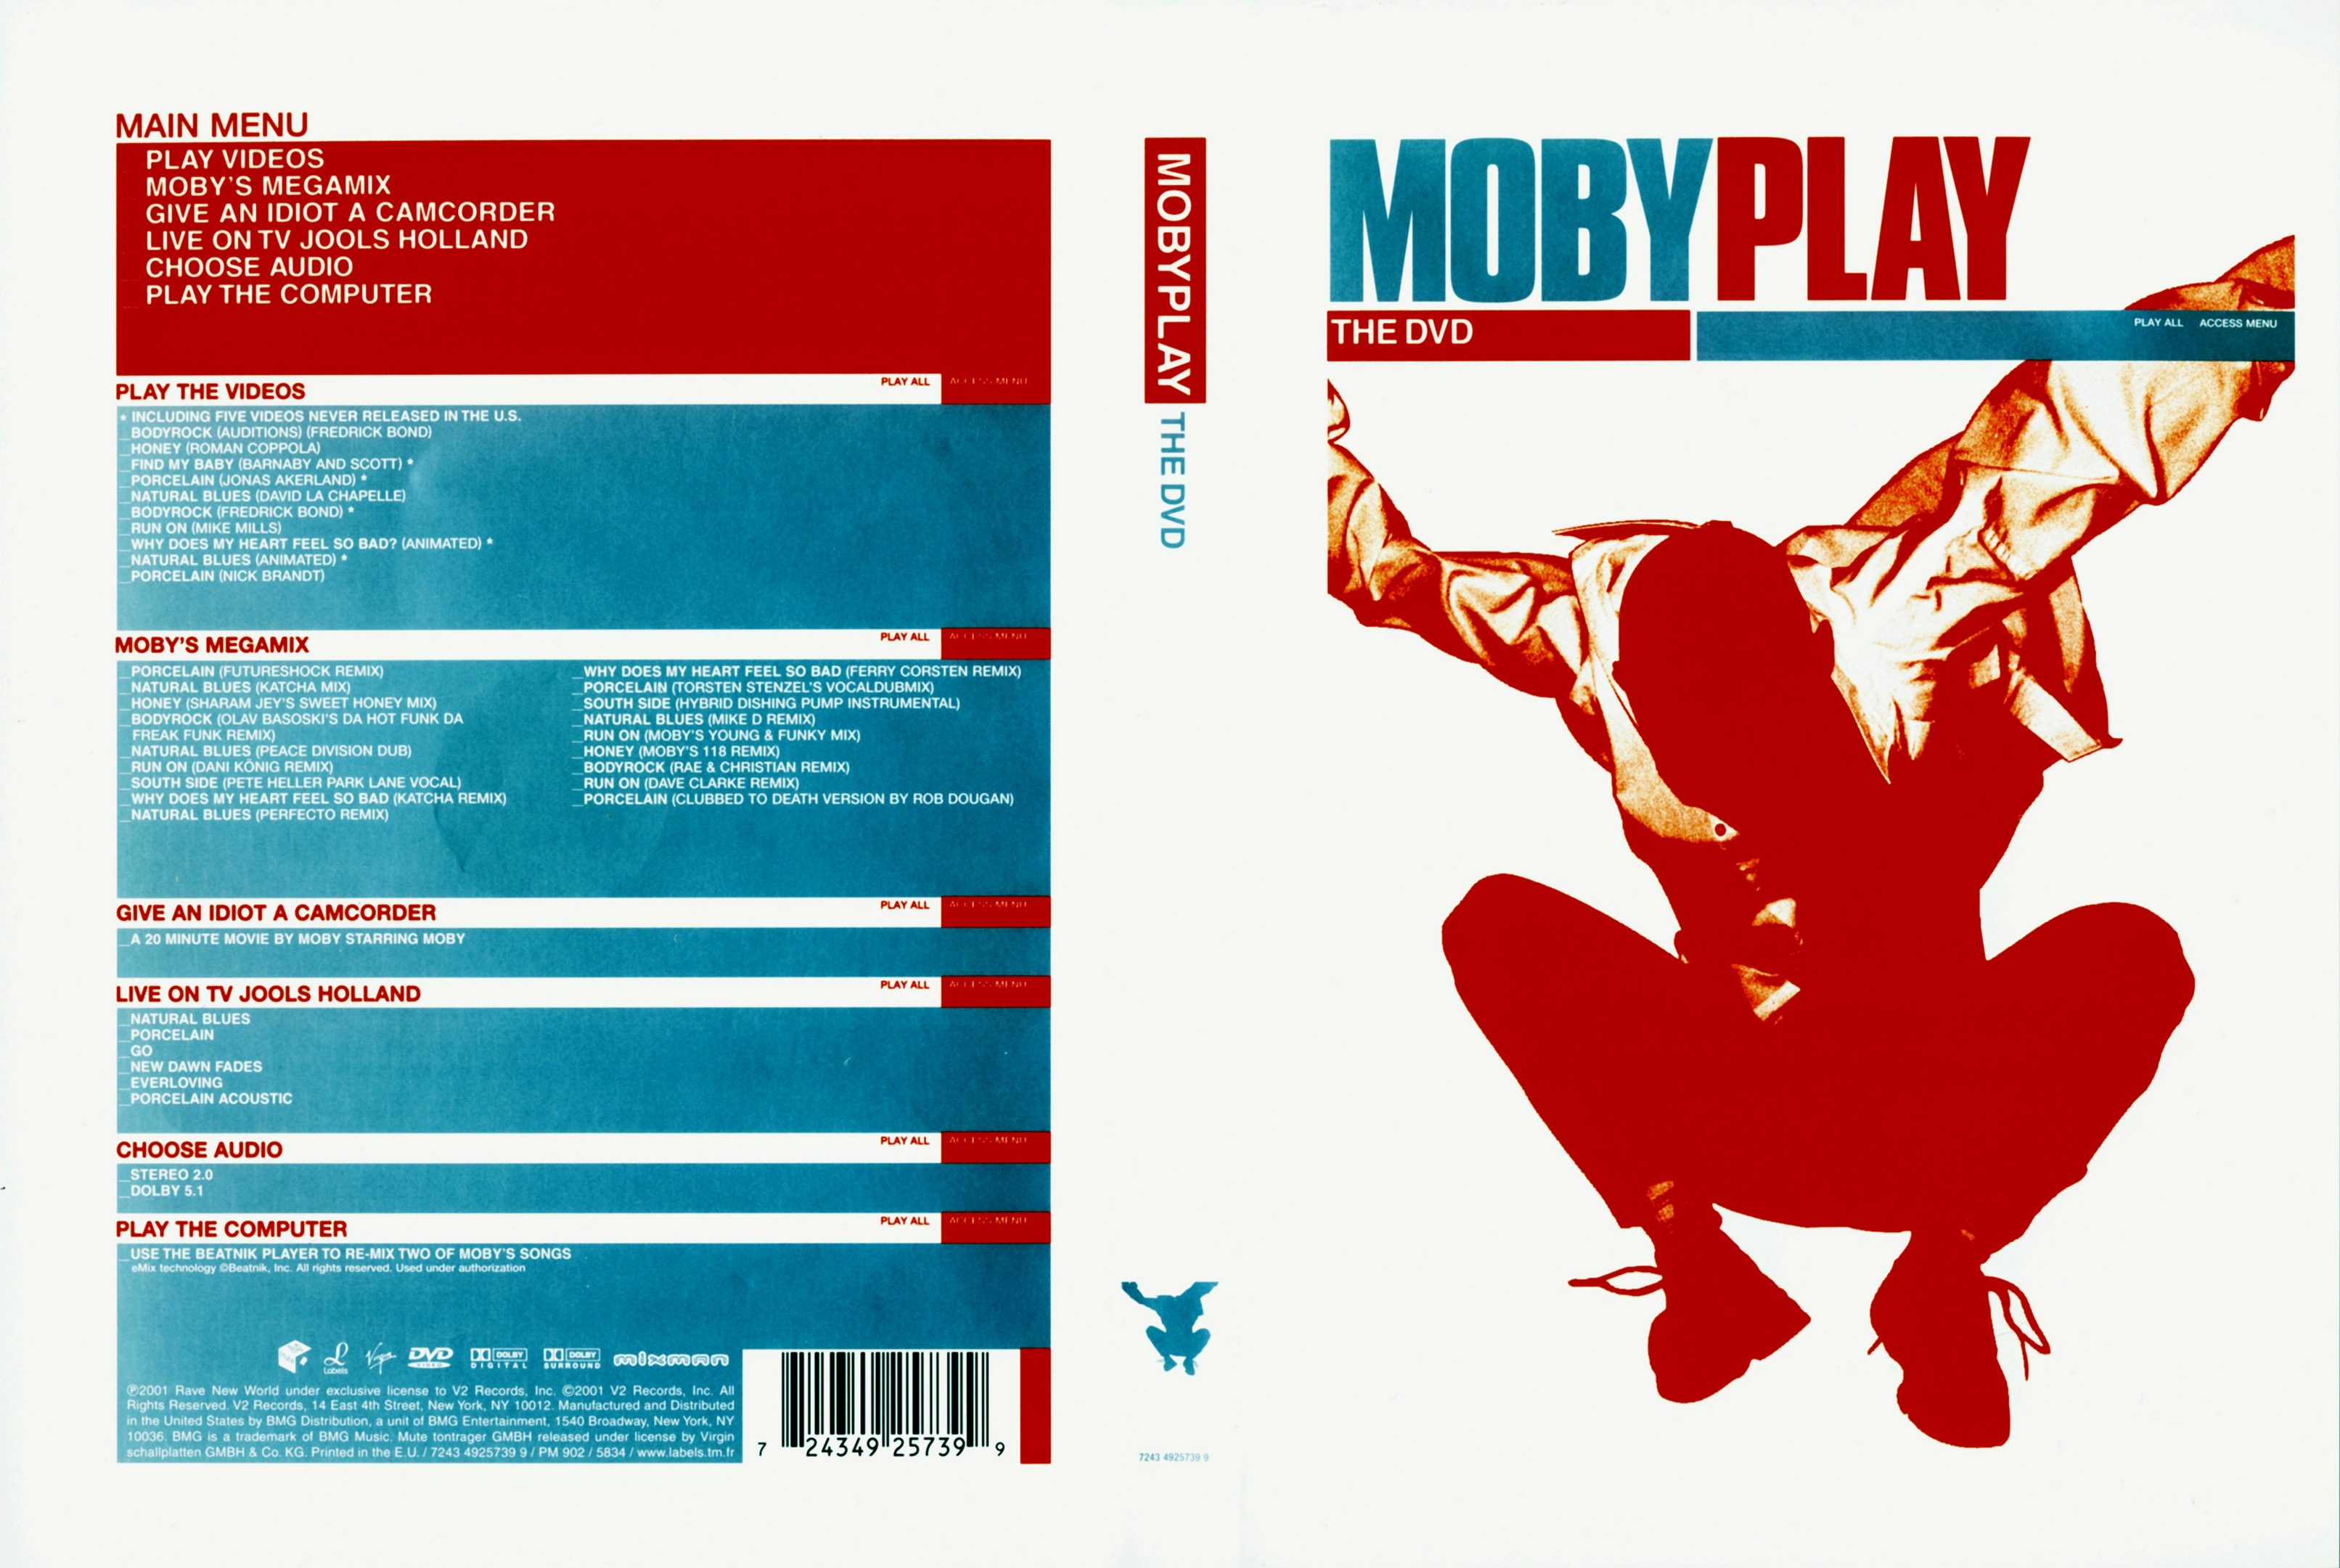 Jaquette DVD Moby play